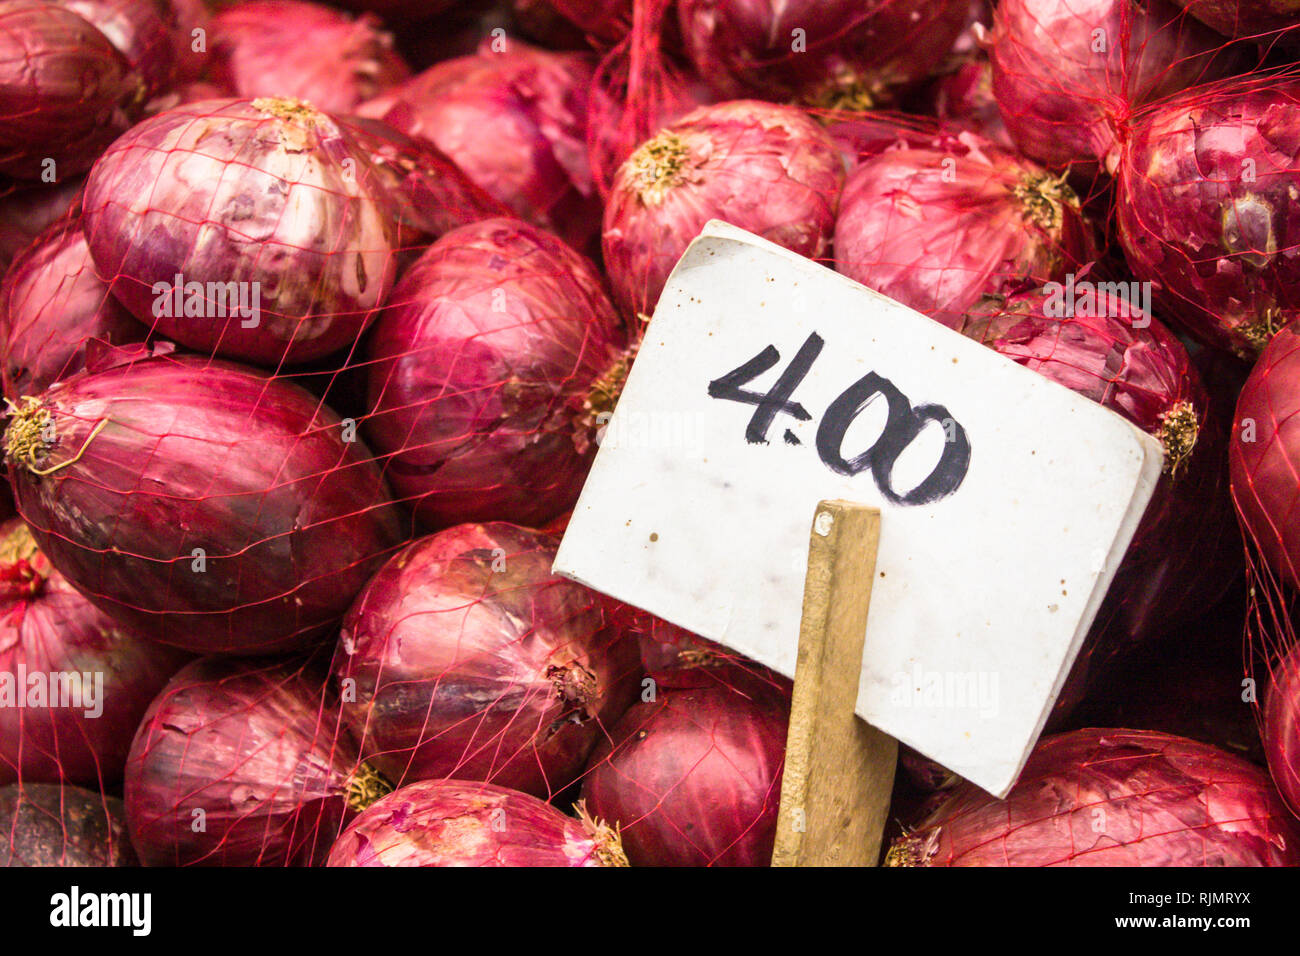 Red onions fresh and organic on sale at a vegetable stand in a food local market with the white price tag on wood stick. Stock Photo